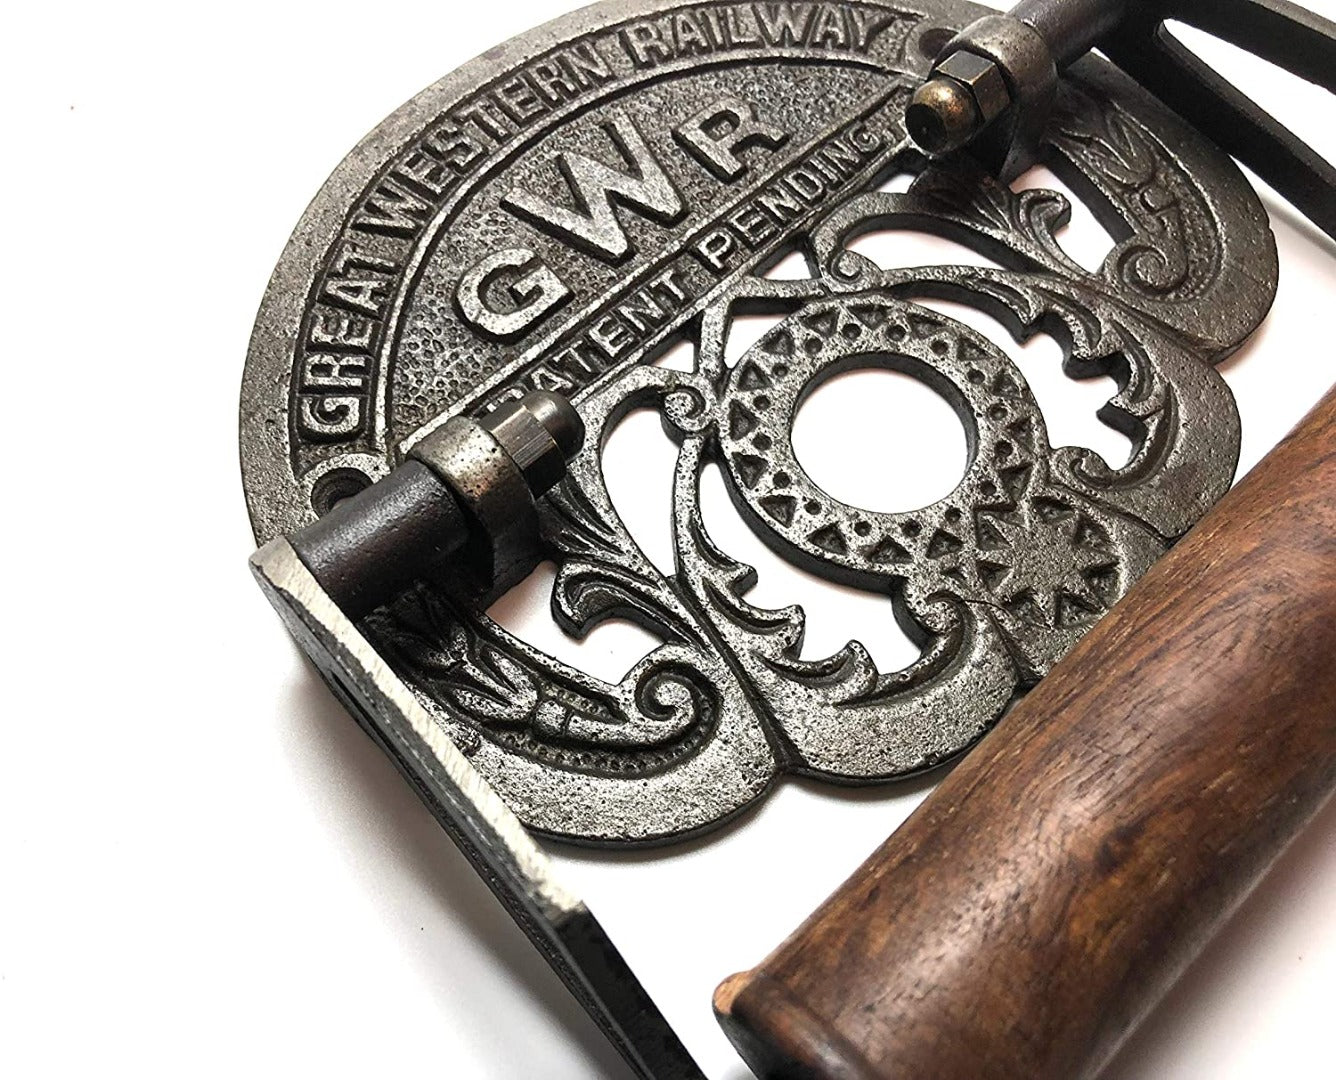 GWR Toilet Roll Holder - Antique Iron unique accessory design for your bathroom